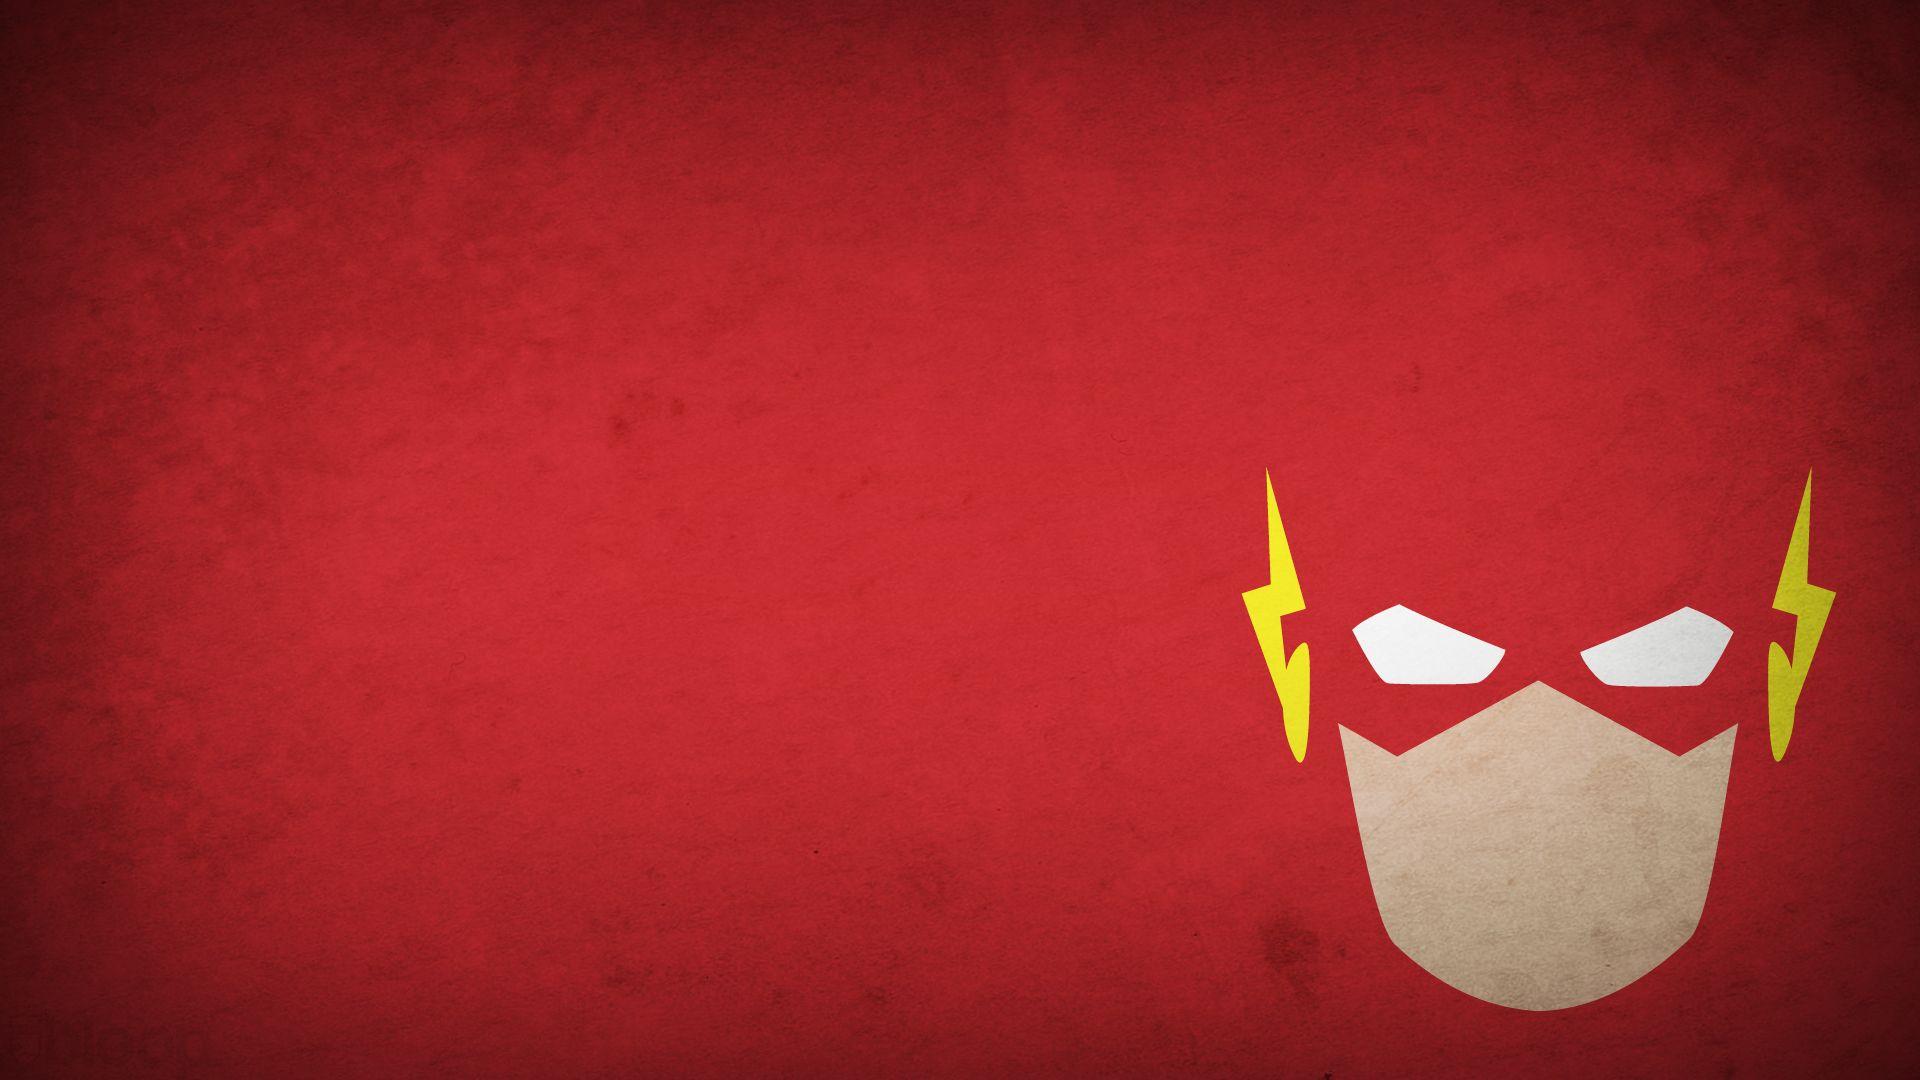 Flash, the flash, wally west, dc comics wallpaper. other